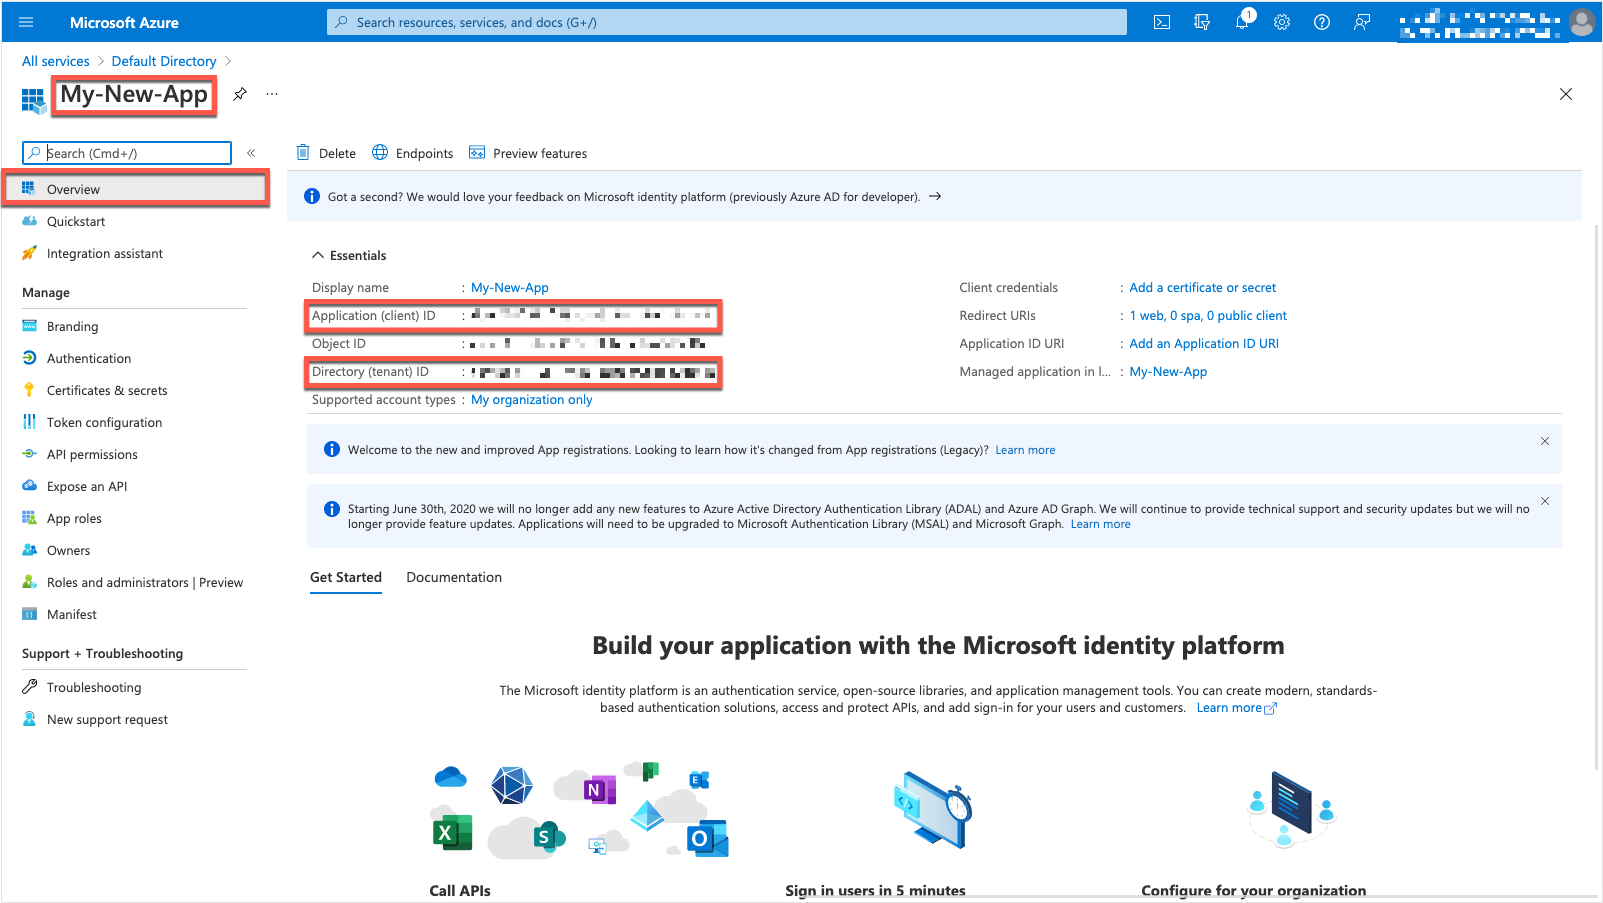 Azure Portal - App Preview (details for Application and Tenant ID)